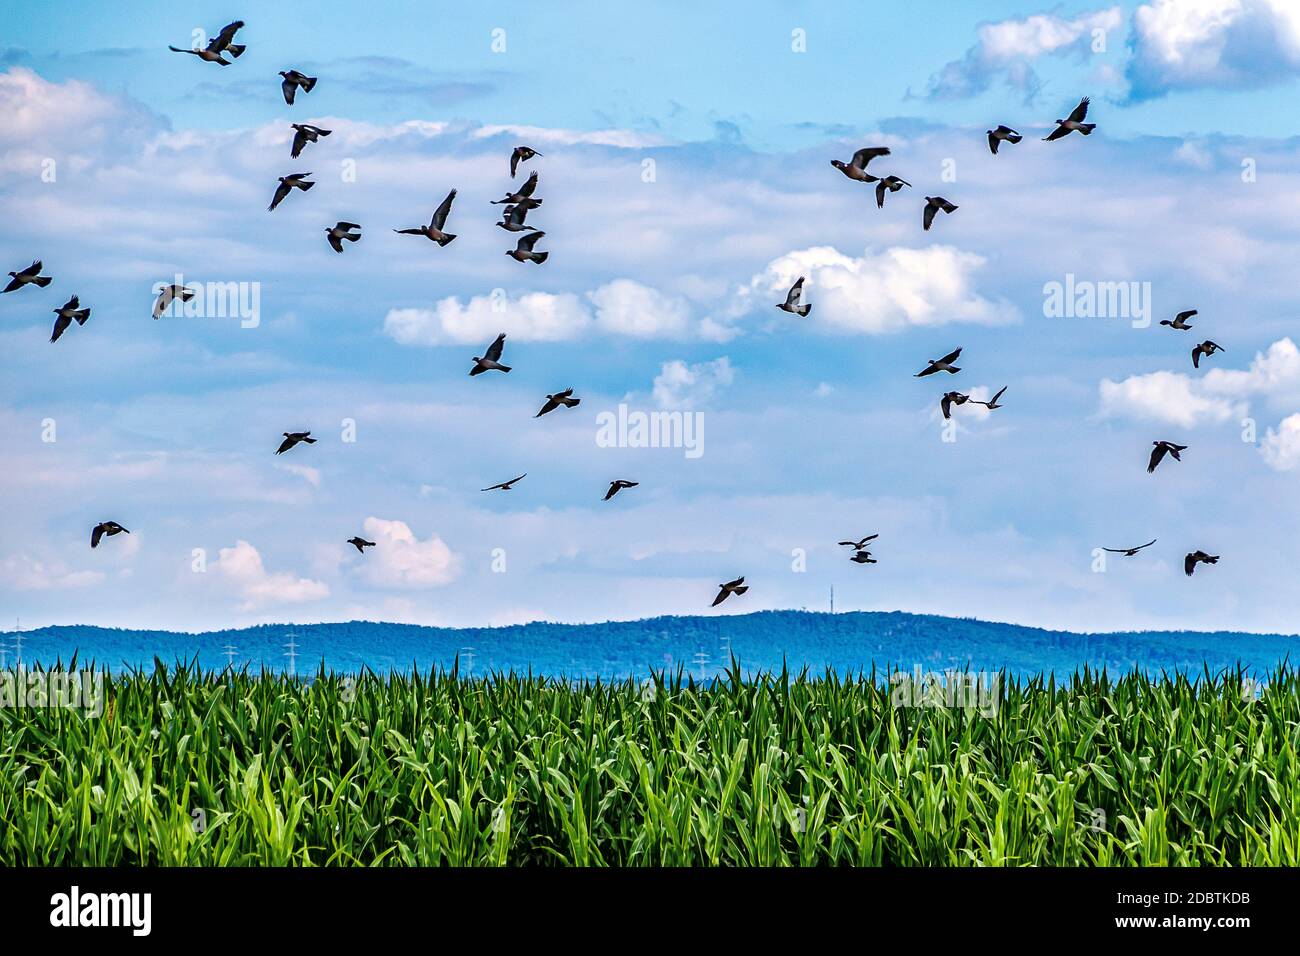 Agricultural landscape - Wild pigeons flying over the corn field. Stock Photo